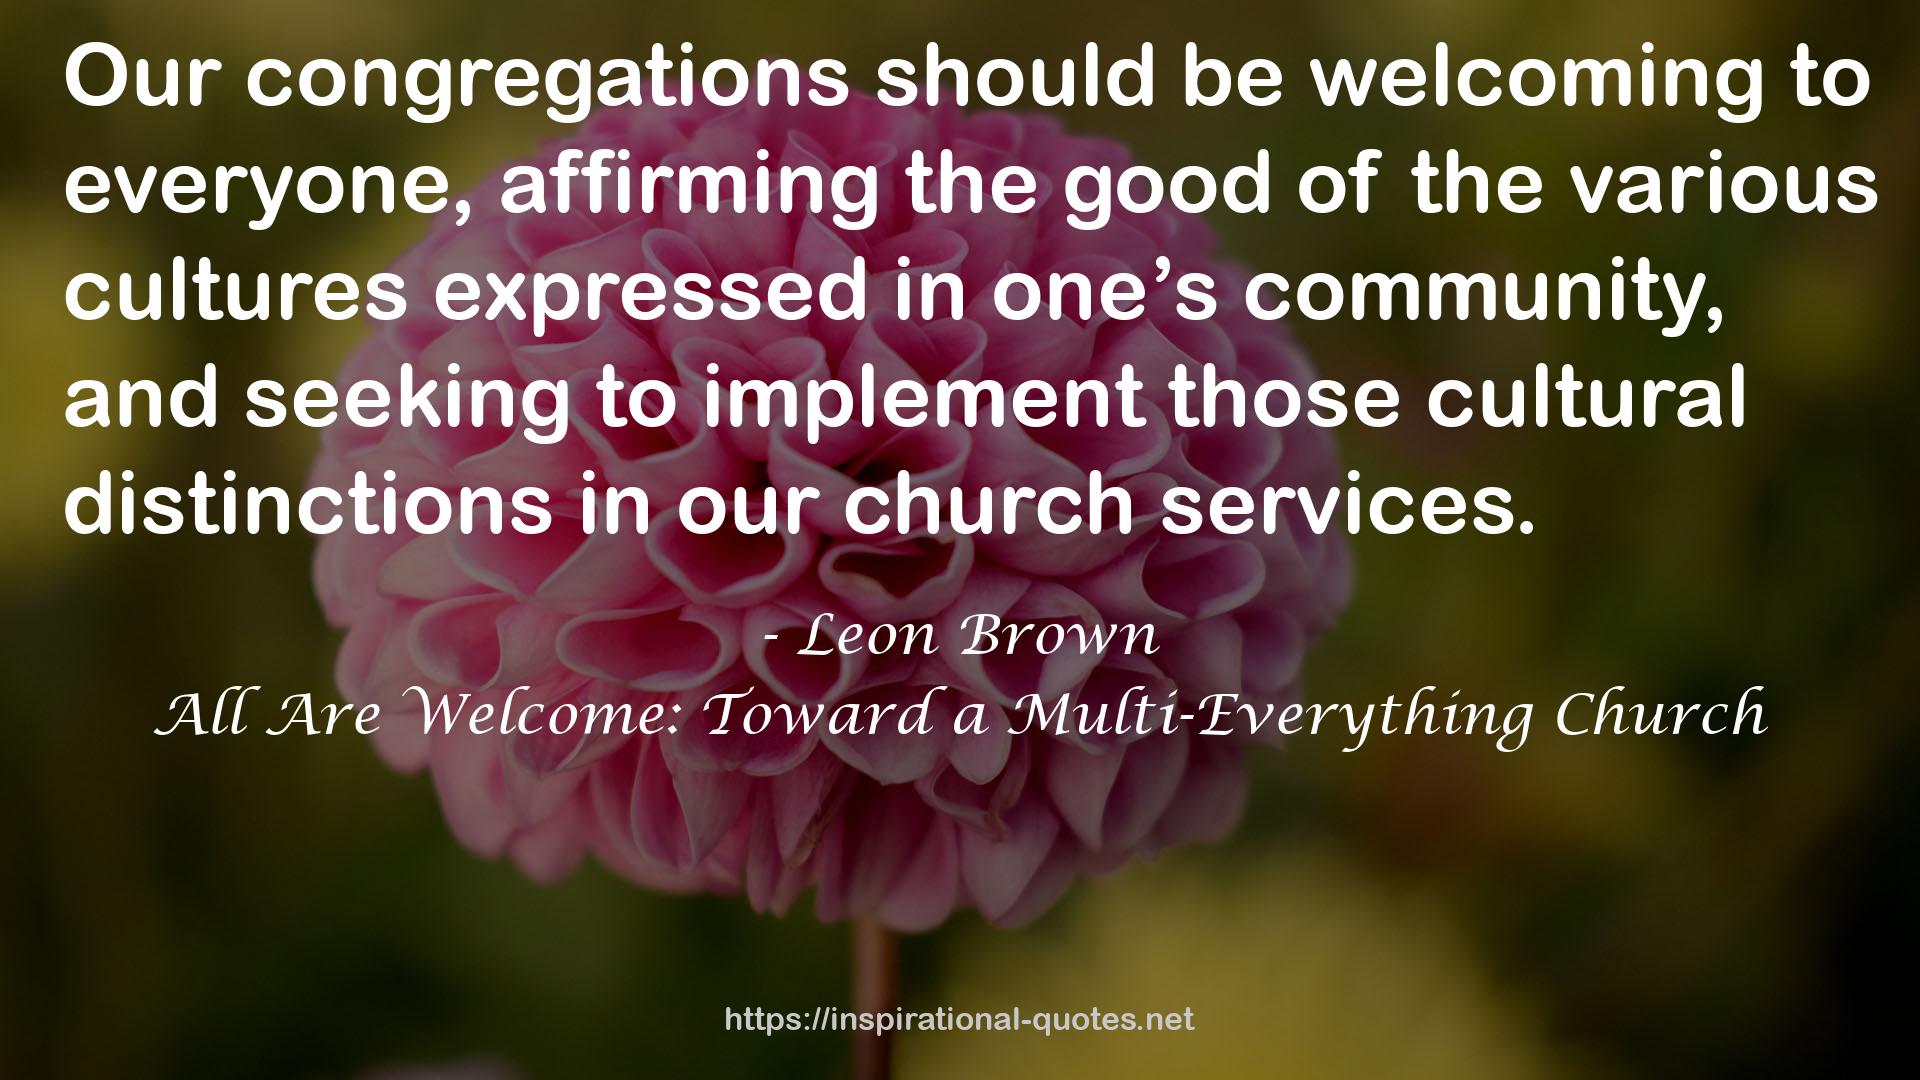 All Are Welcome: Toward a Multi-Everything Church QUOTES